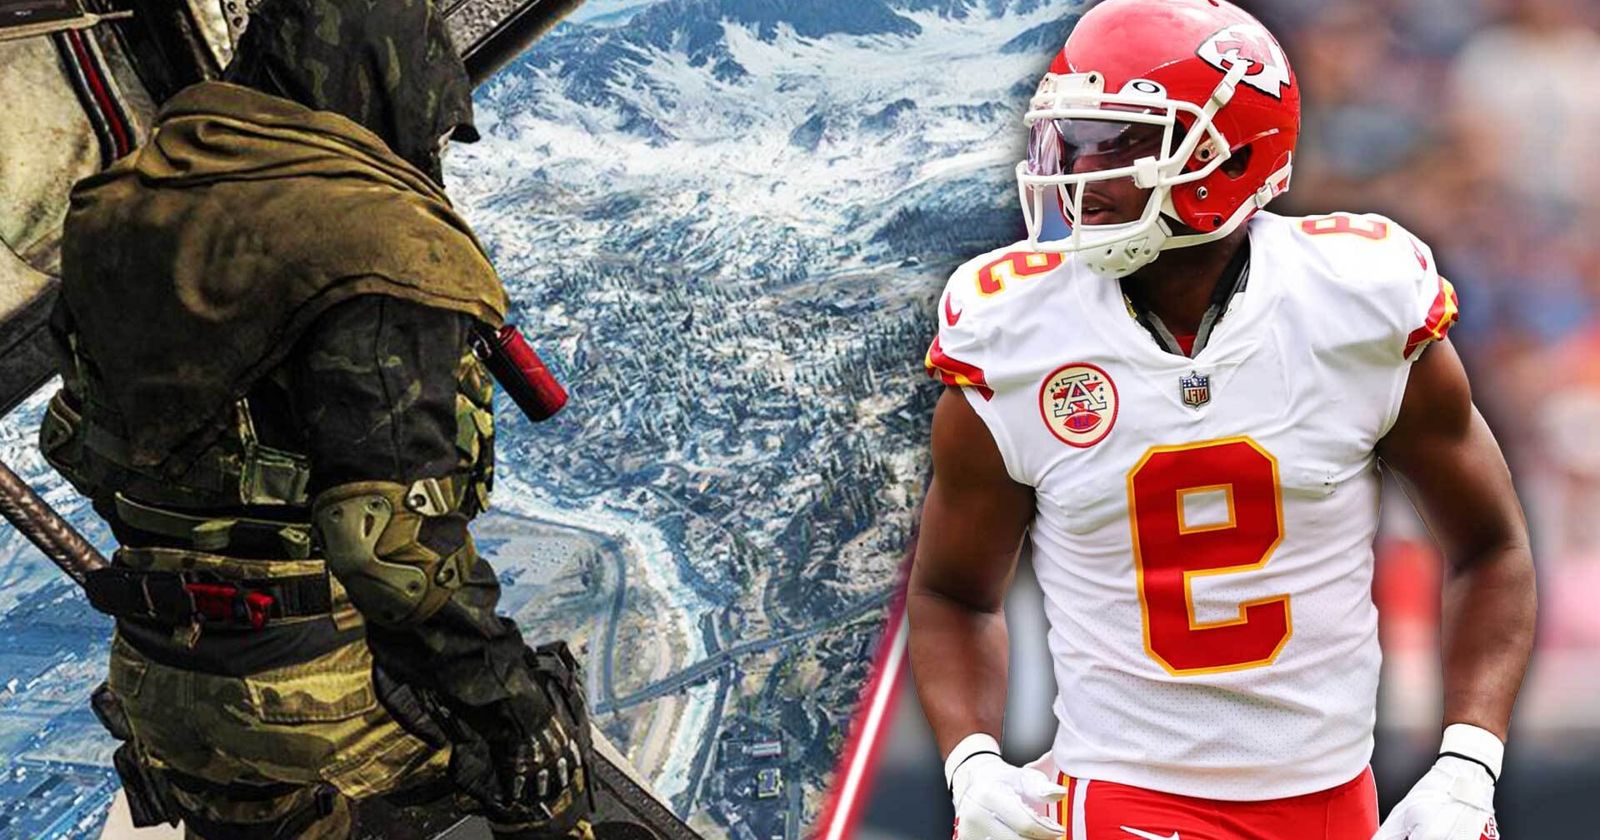 NFL WR JuJu Smith-Schuster claims that Warzone helped the Chiefs